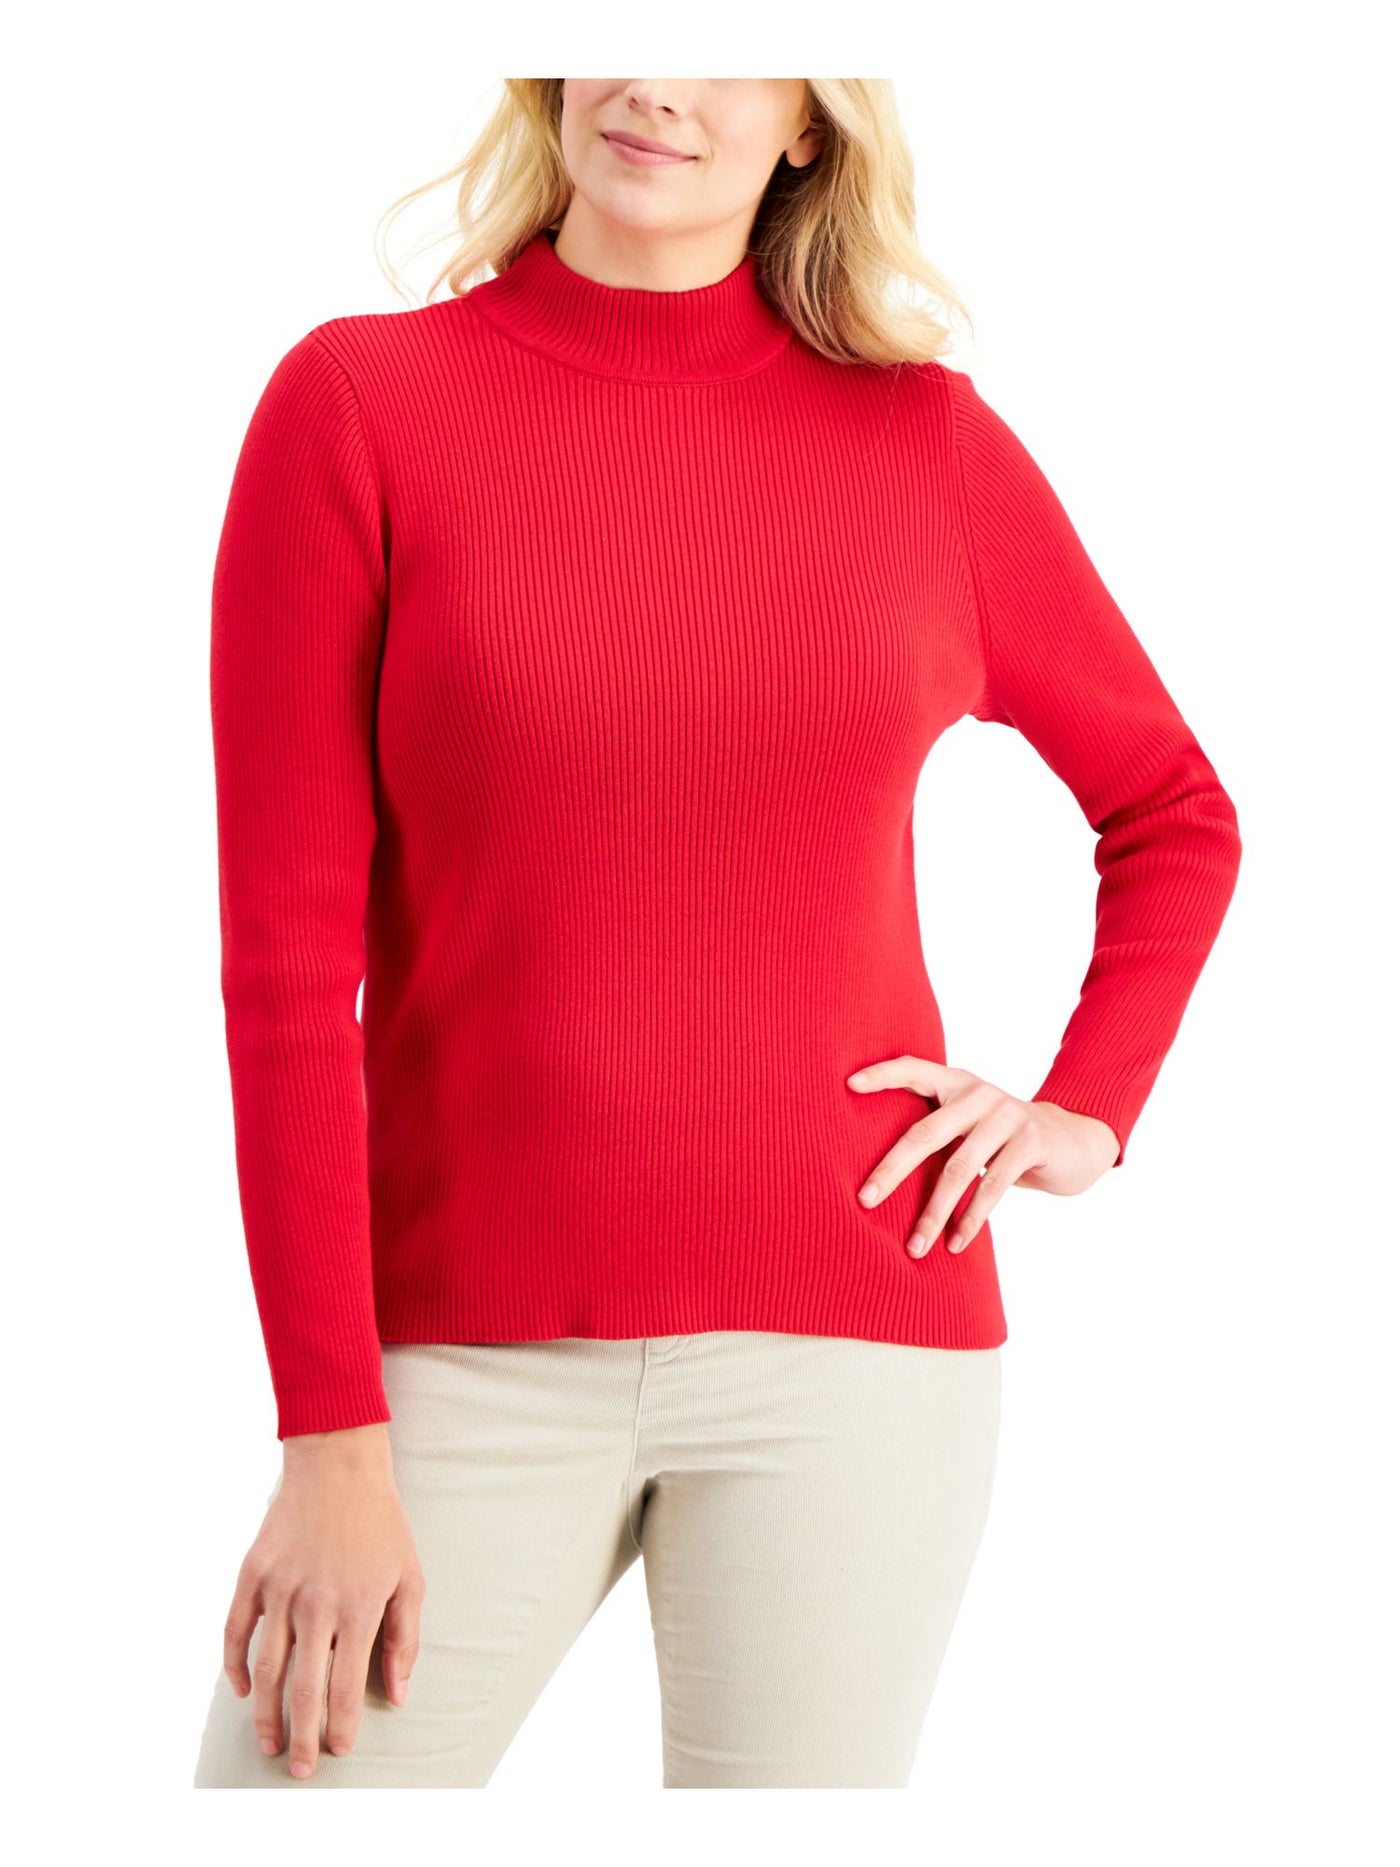 KAREN SCOTT Womens Red Ribbed Relaxed Fit Long Sleeve Mock Neck Wear To Work Sweater S